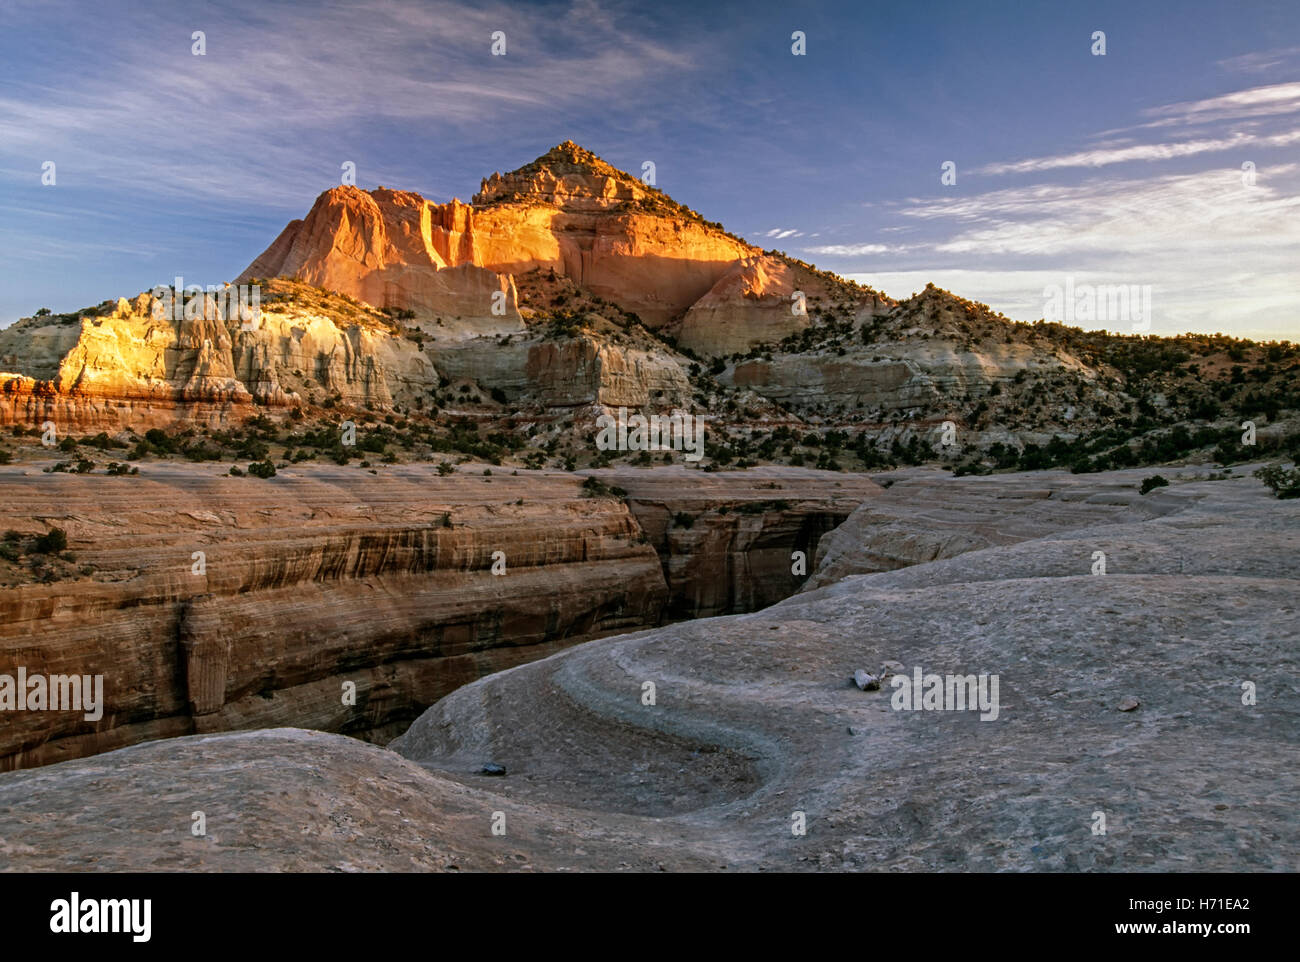 Pyramid Rock, Red Rock State Park, Gallup, New Mexico, USA Stockfoto